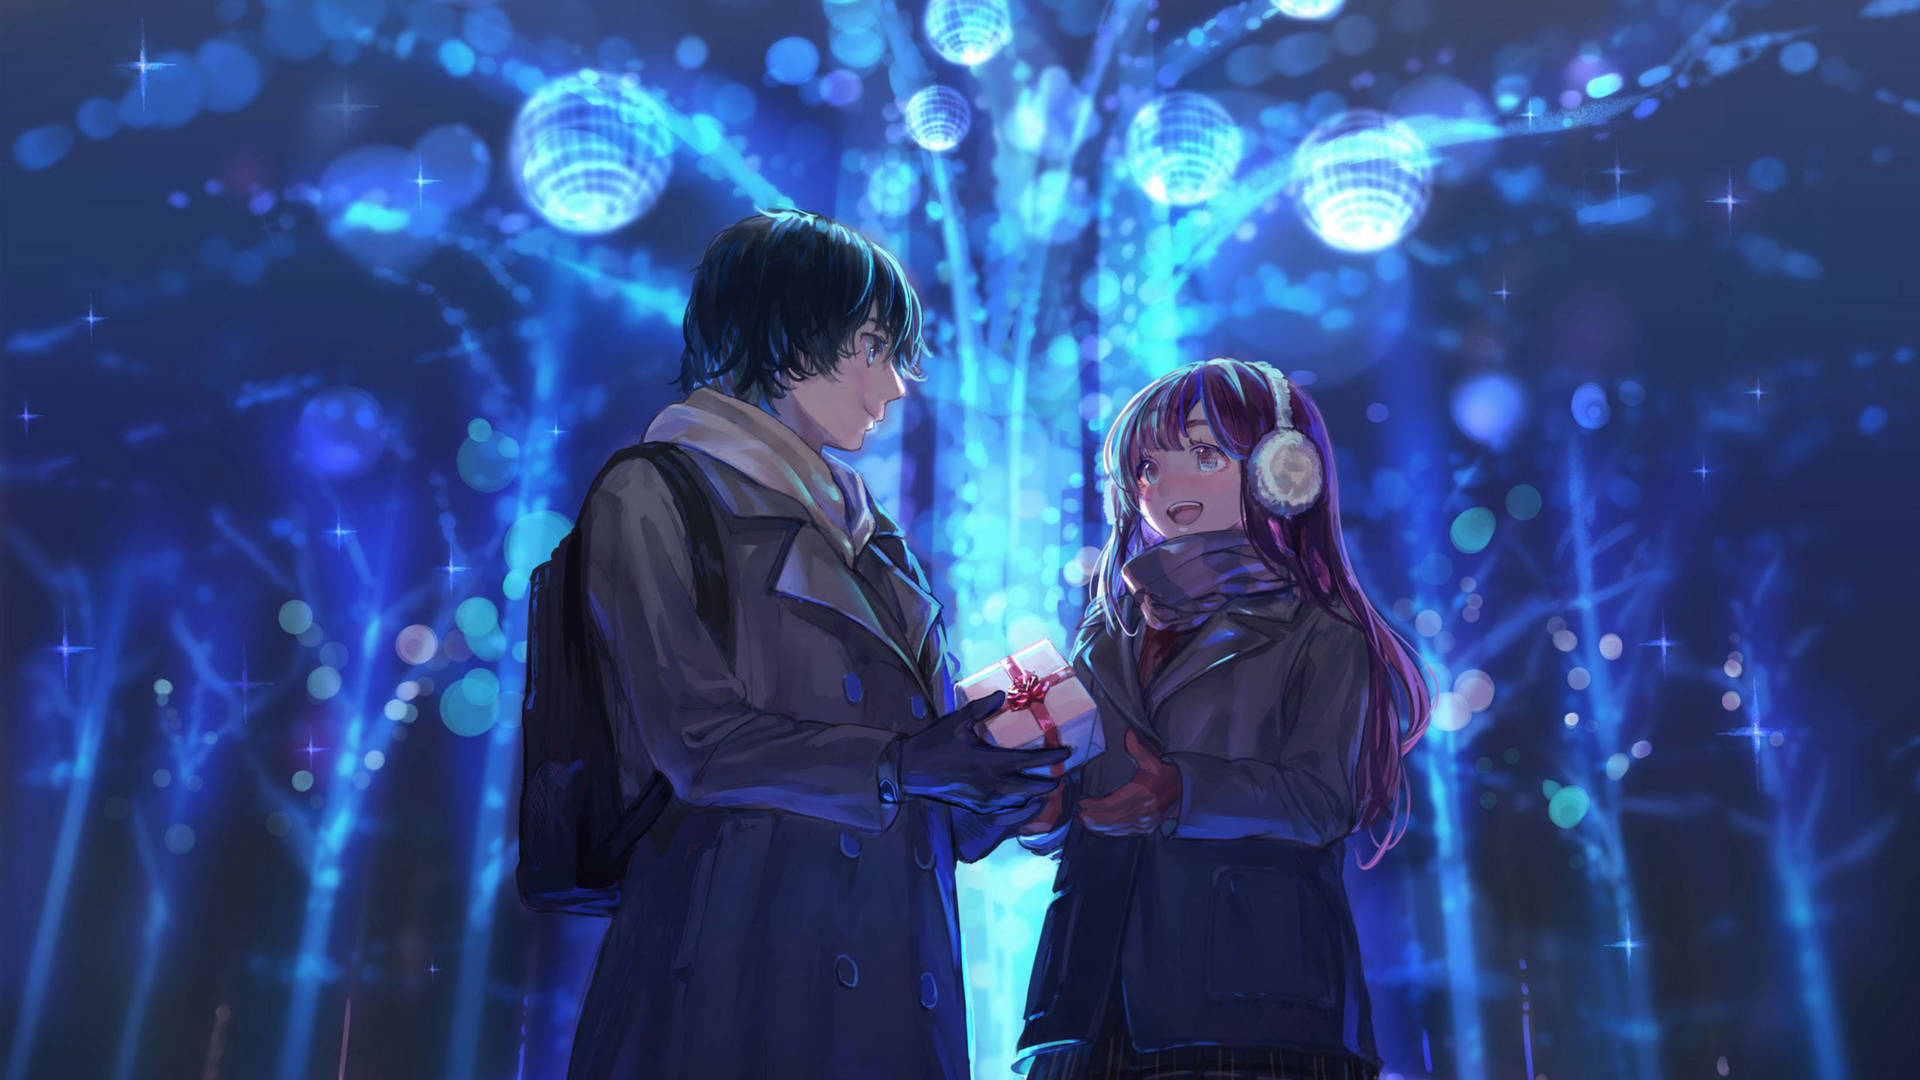 Cute Anime Couple Gift Background